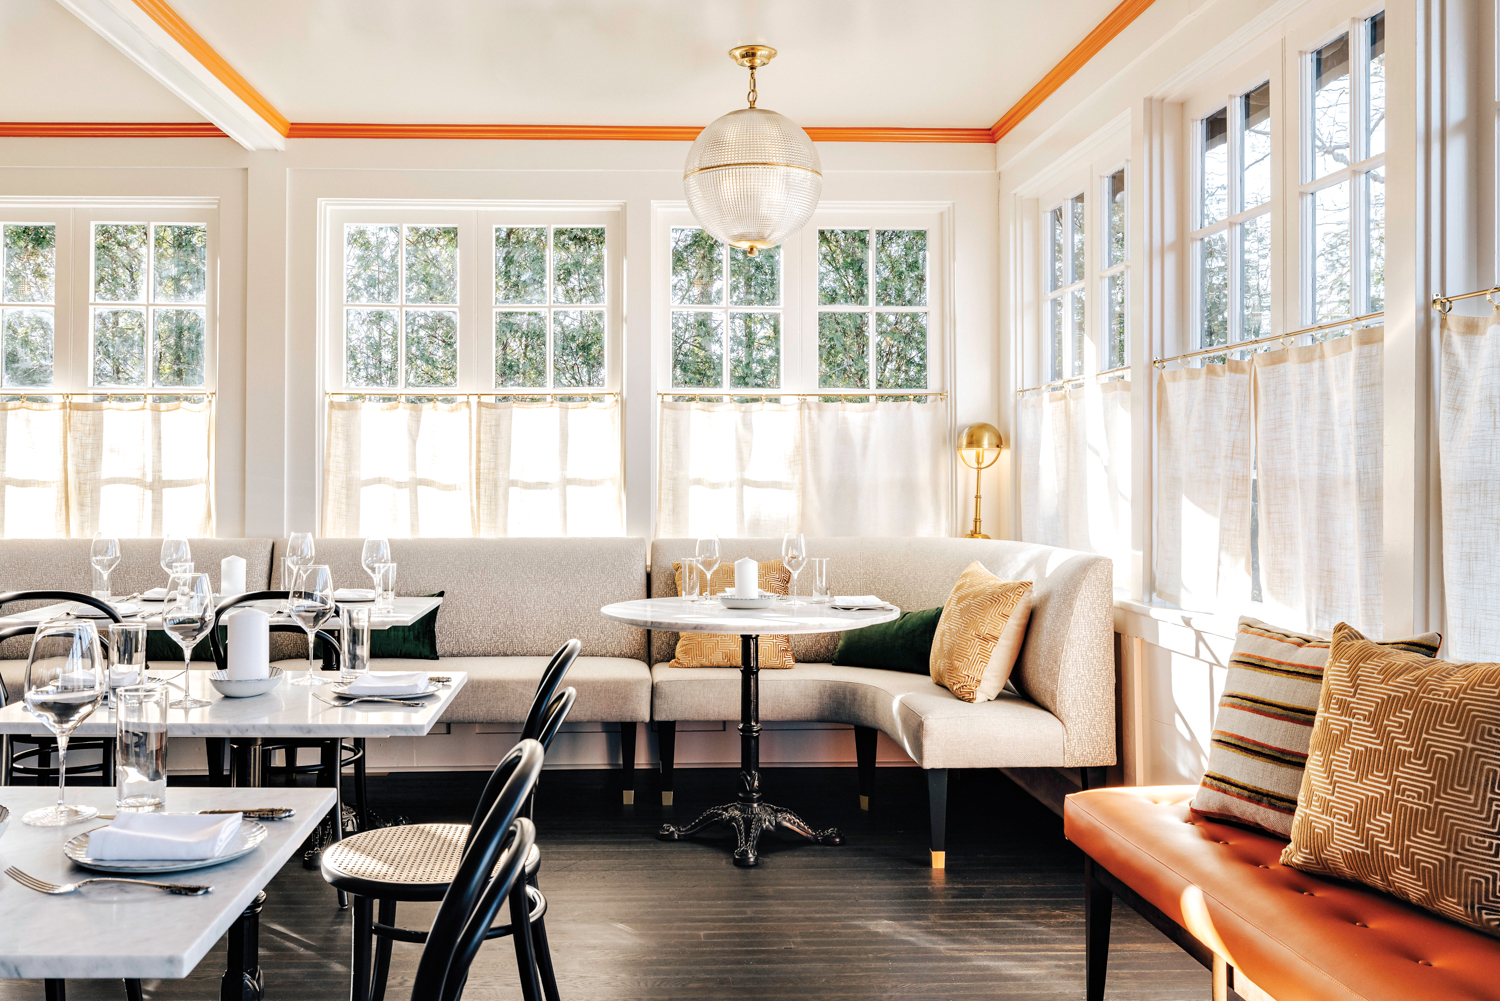 French restaurant Enchanté with window-clad dining room and orange accents